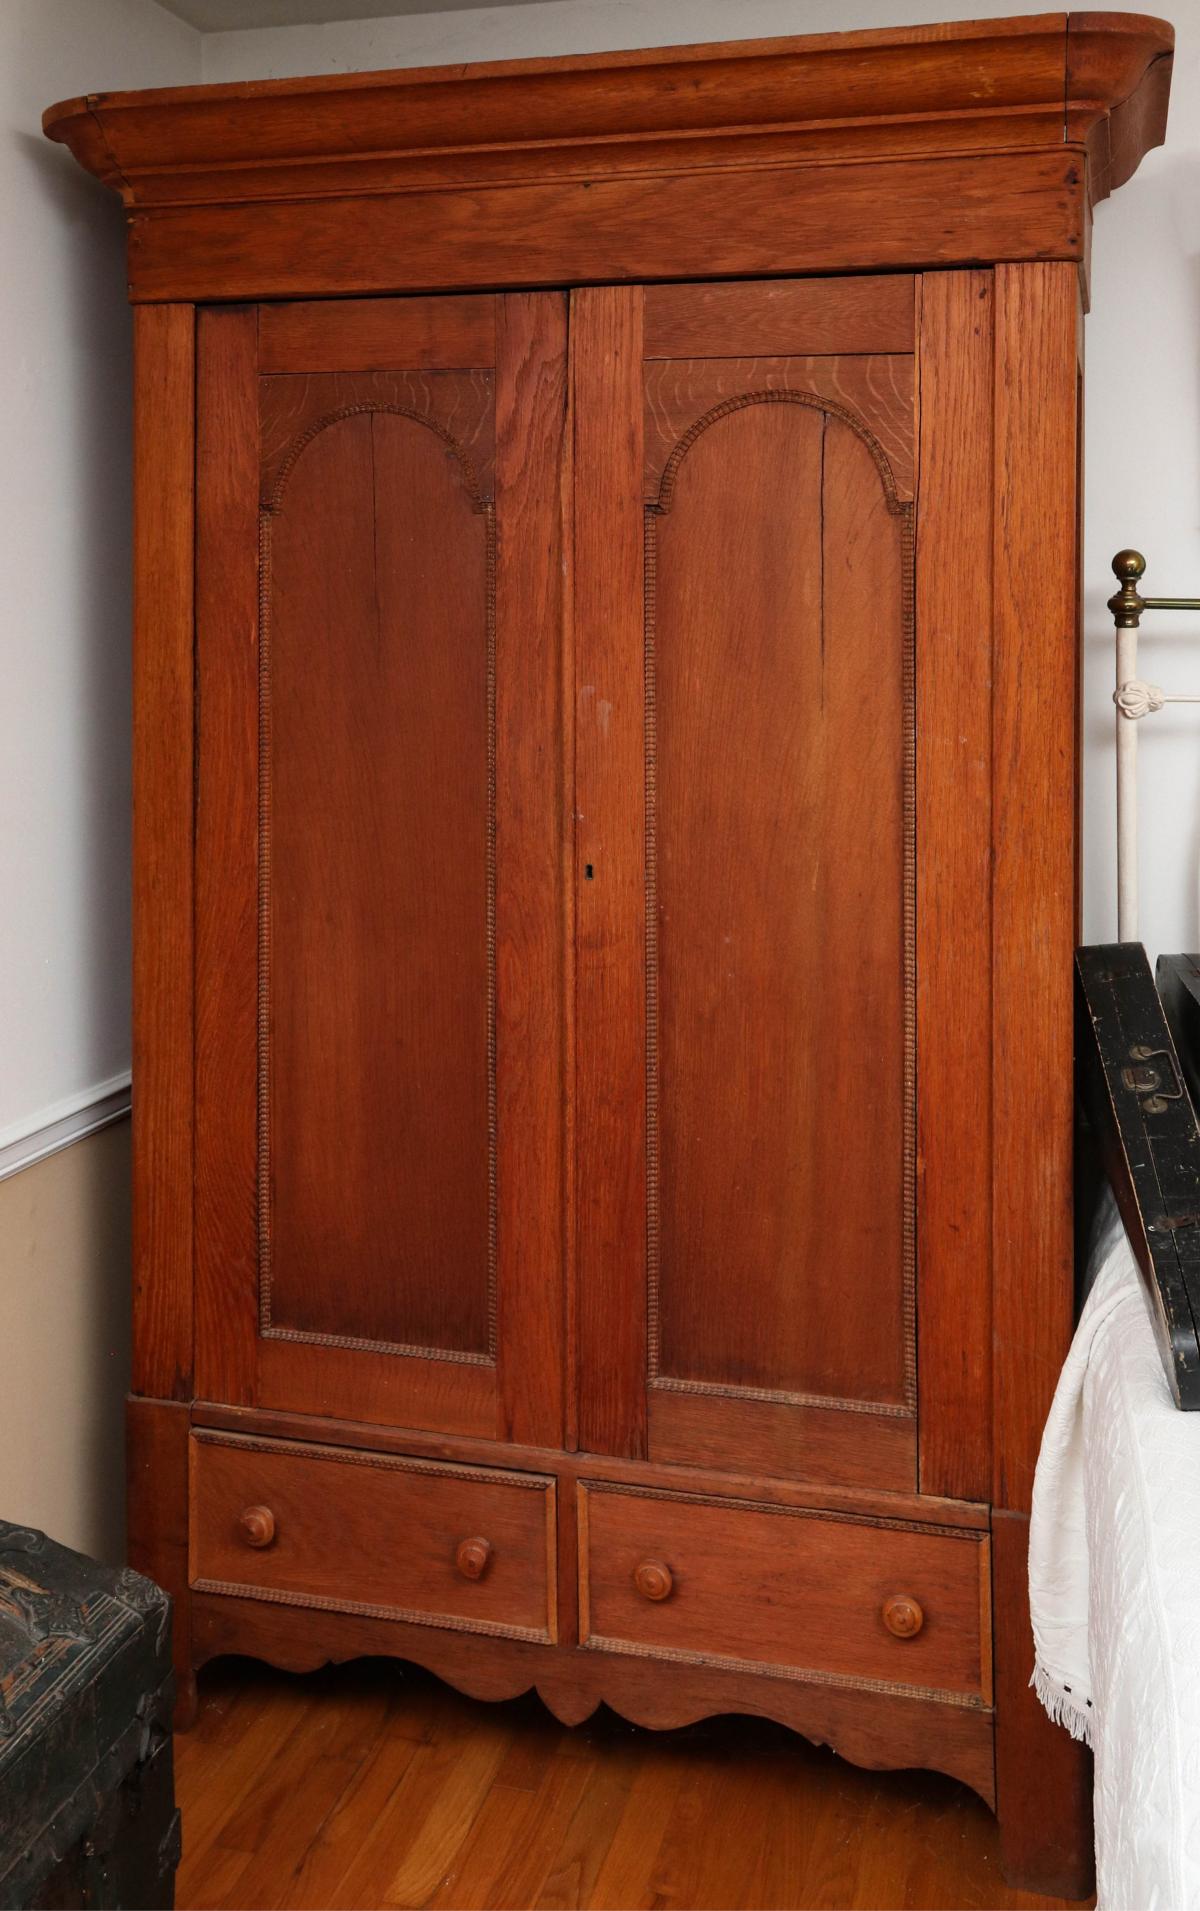 A TALL 19TH C. TWO DOOR WARDROBE WITH DRAWERS